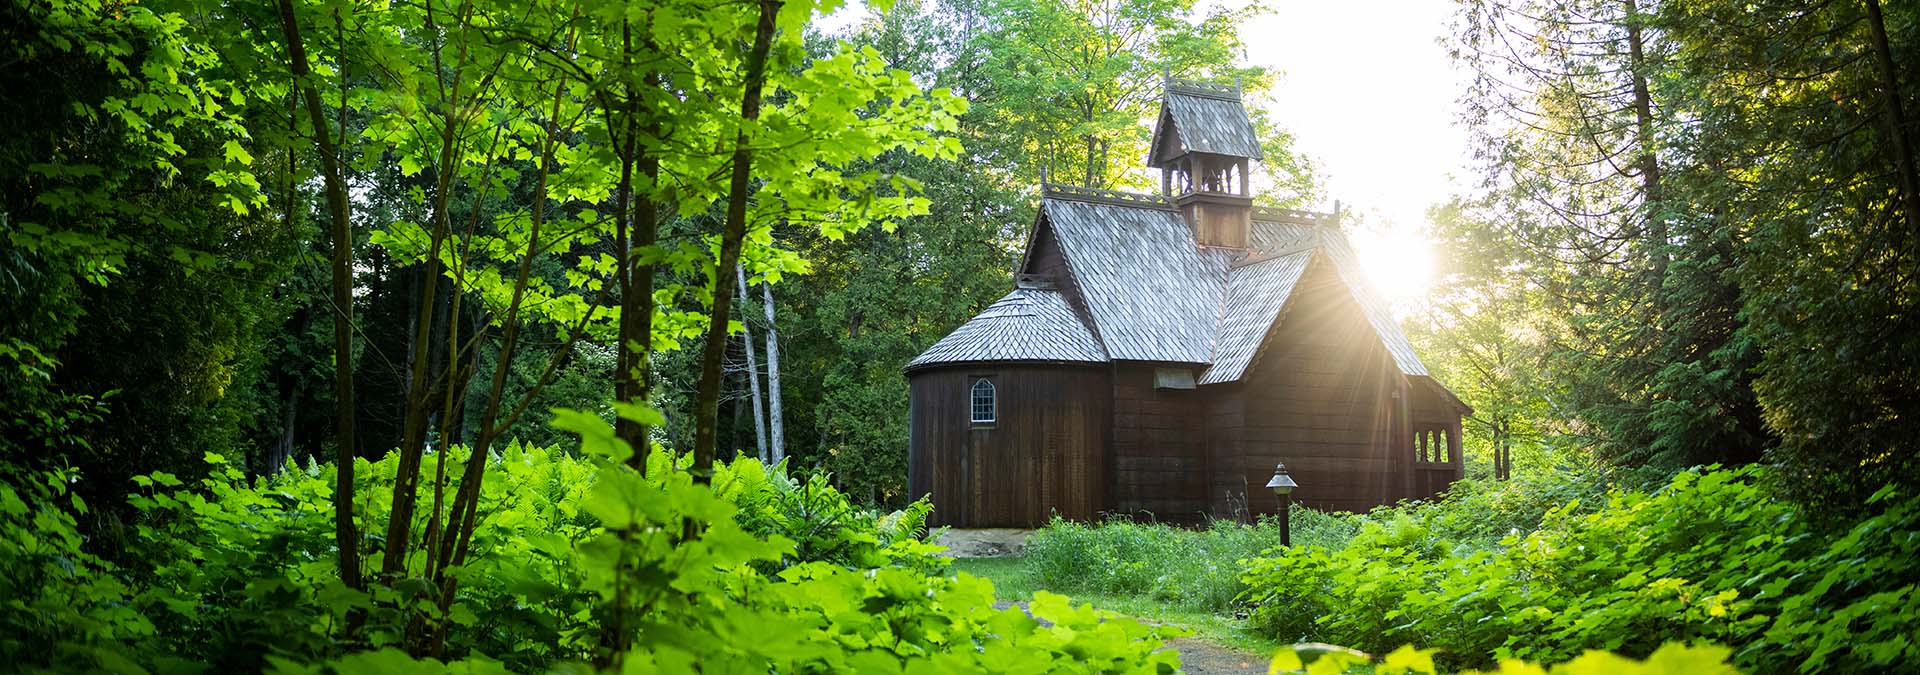 Wooden church surrounded by trees.